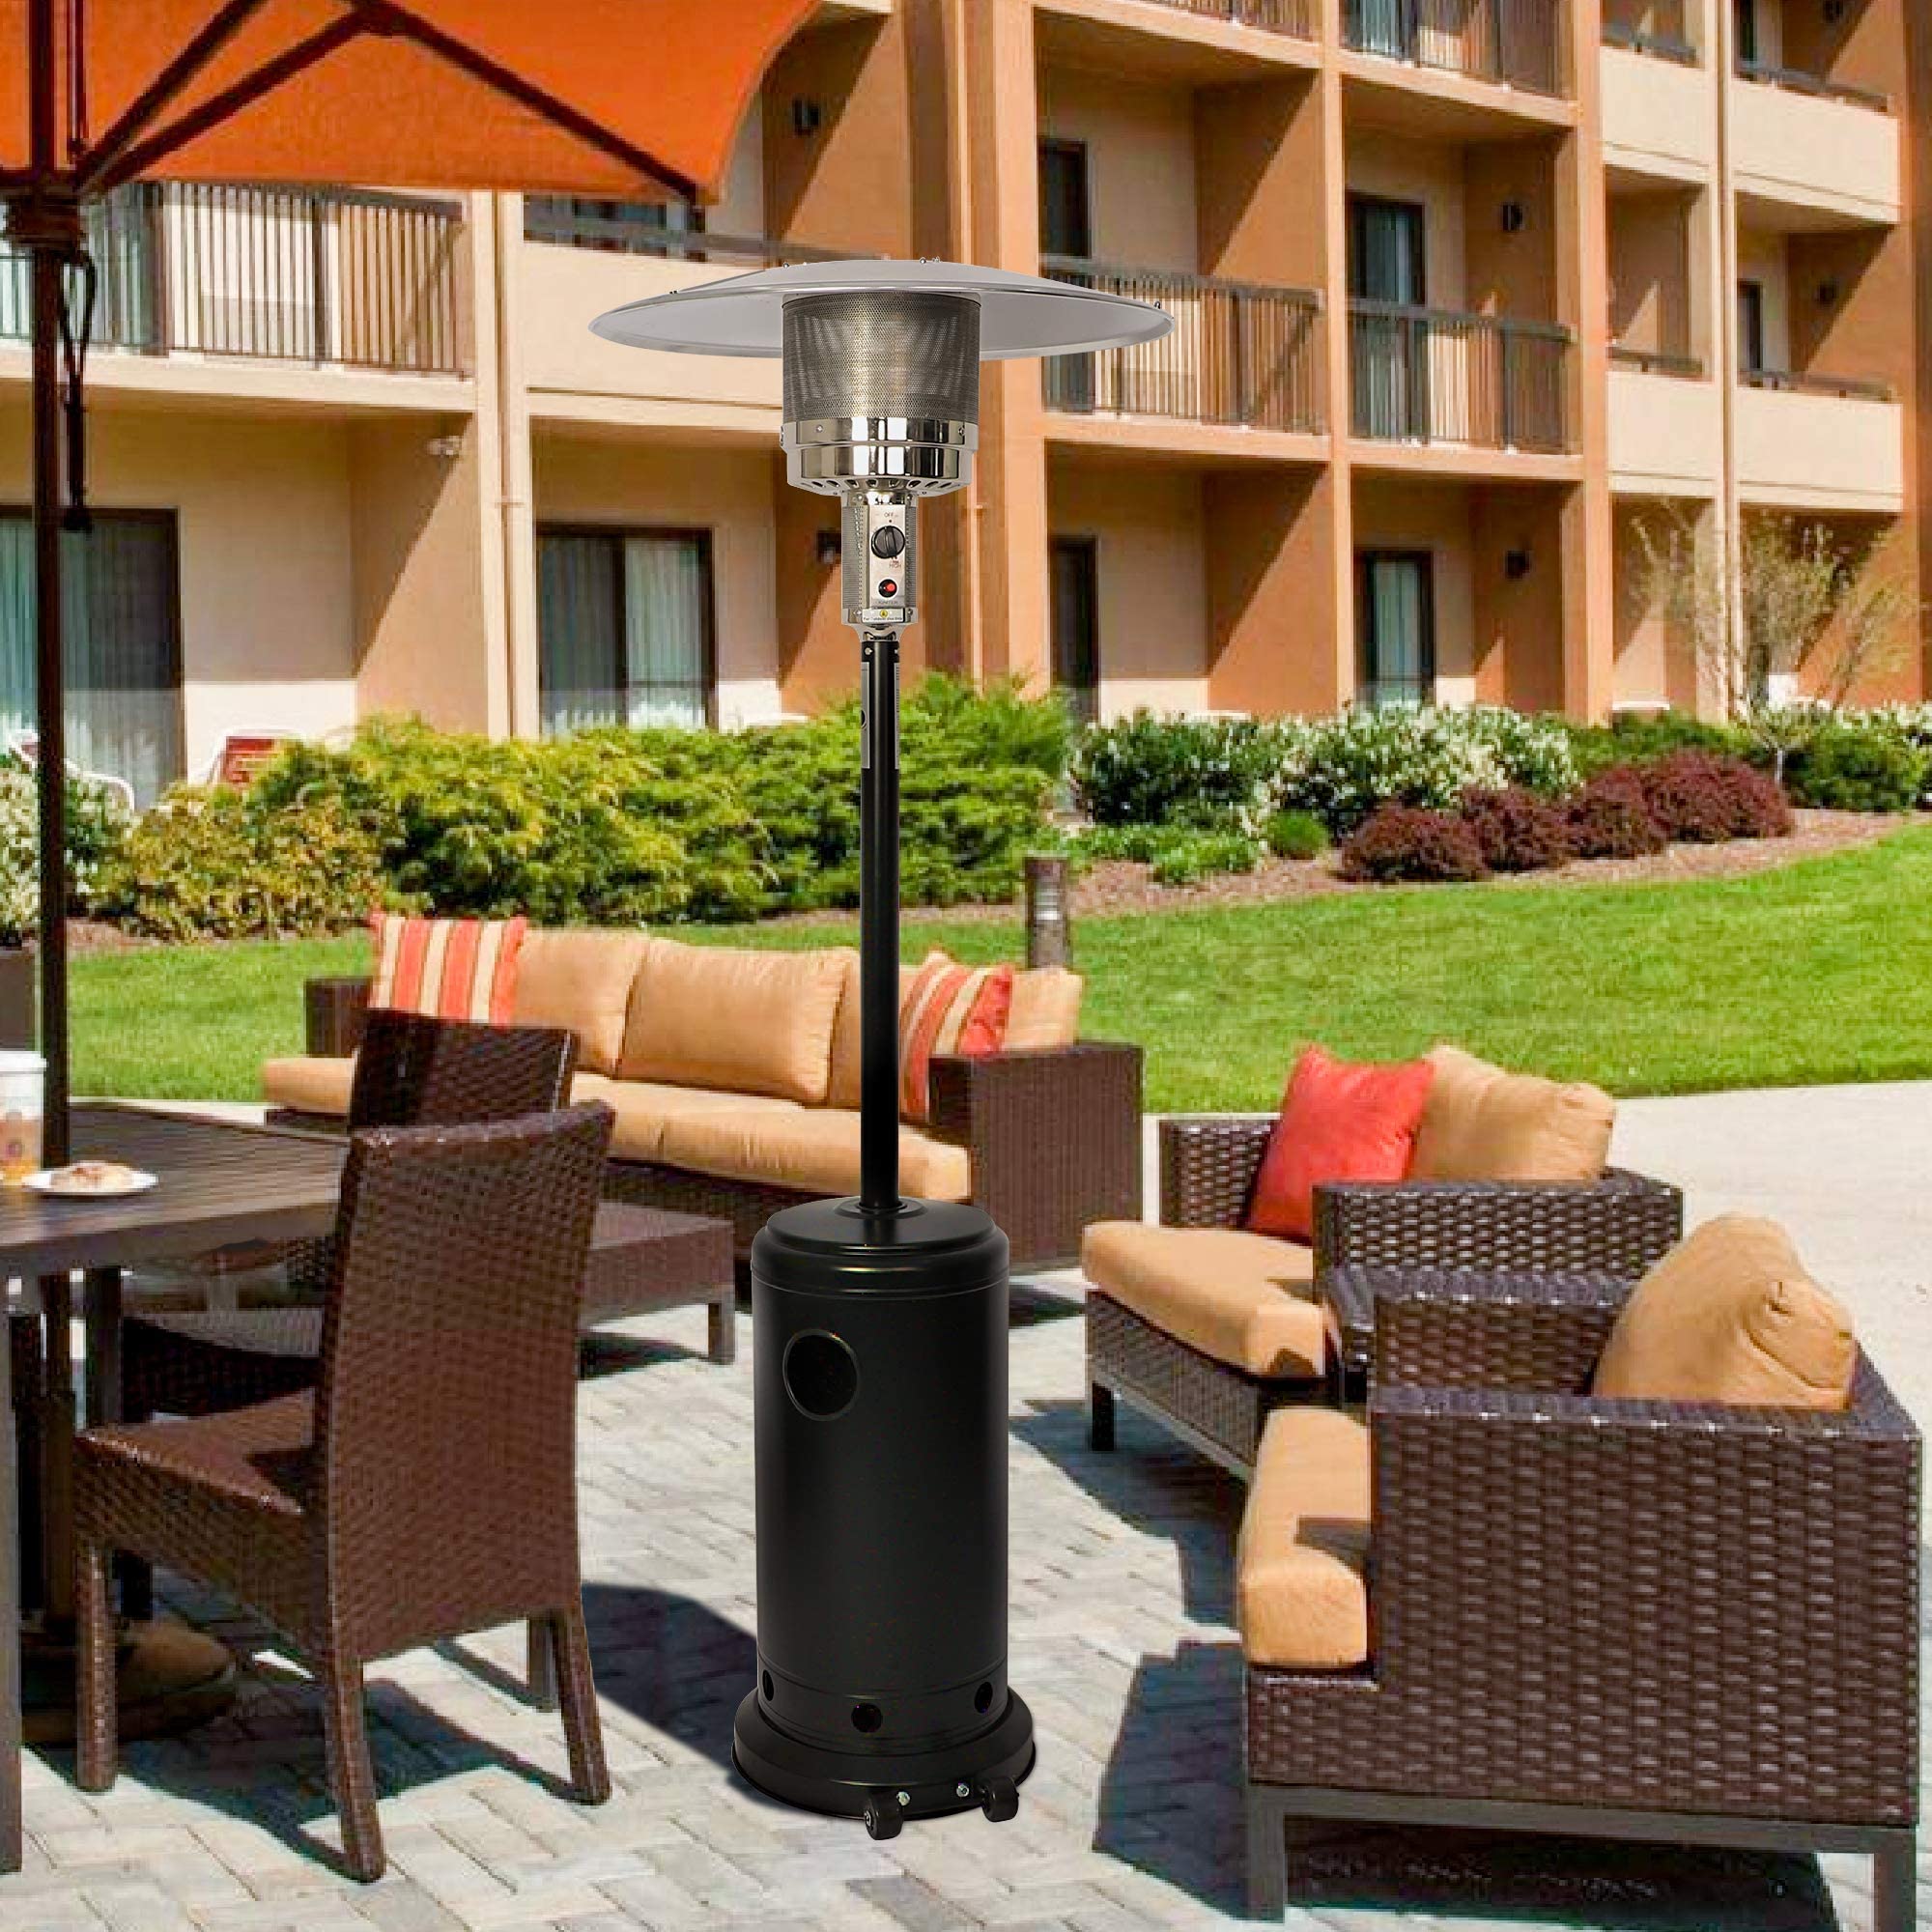 Vilobos Outdoor Patio Heater Propane Standing Gas LP Heater with Wheels 87 Inches Tall for Commercial & Residential Courtyard Outside(Black)